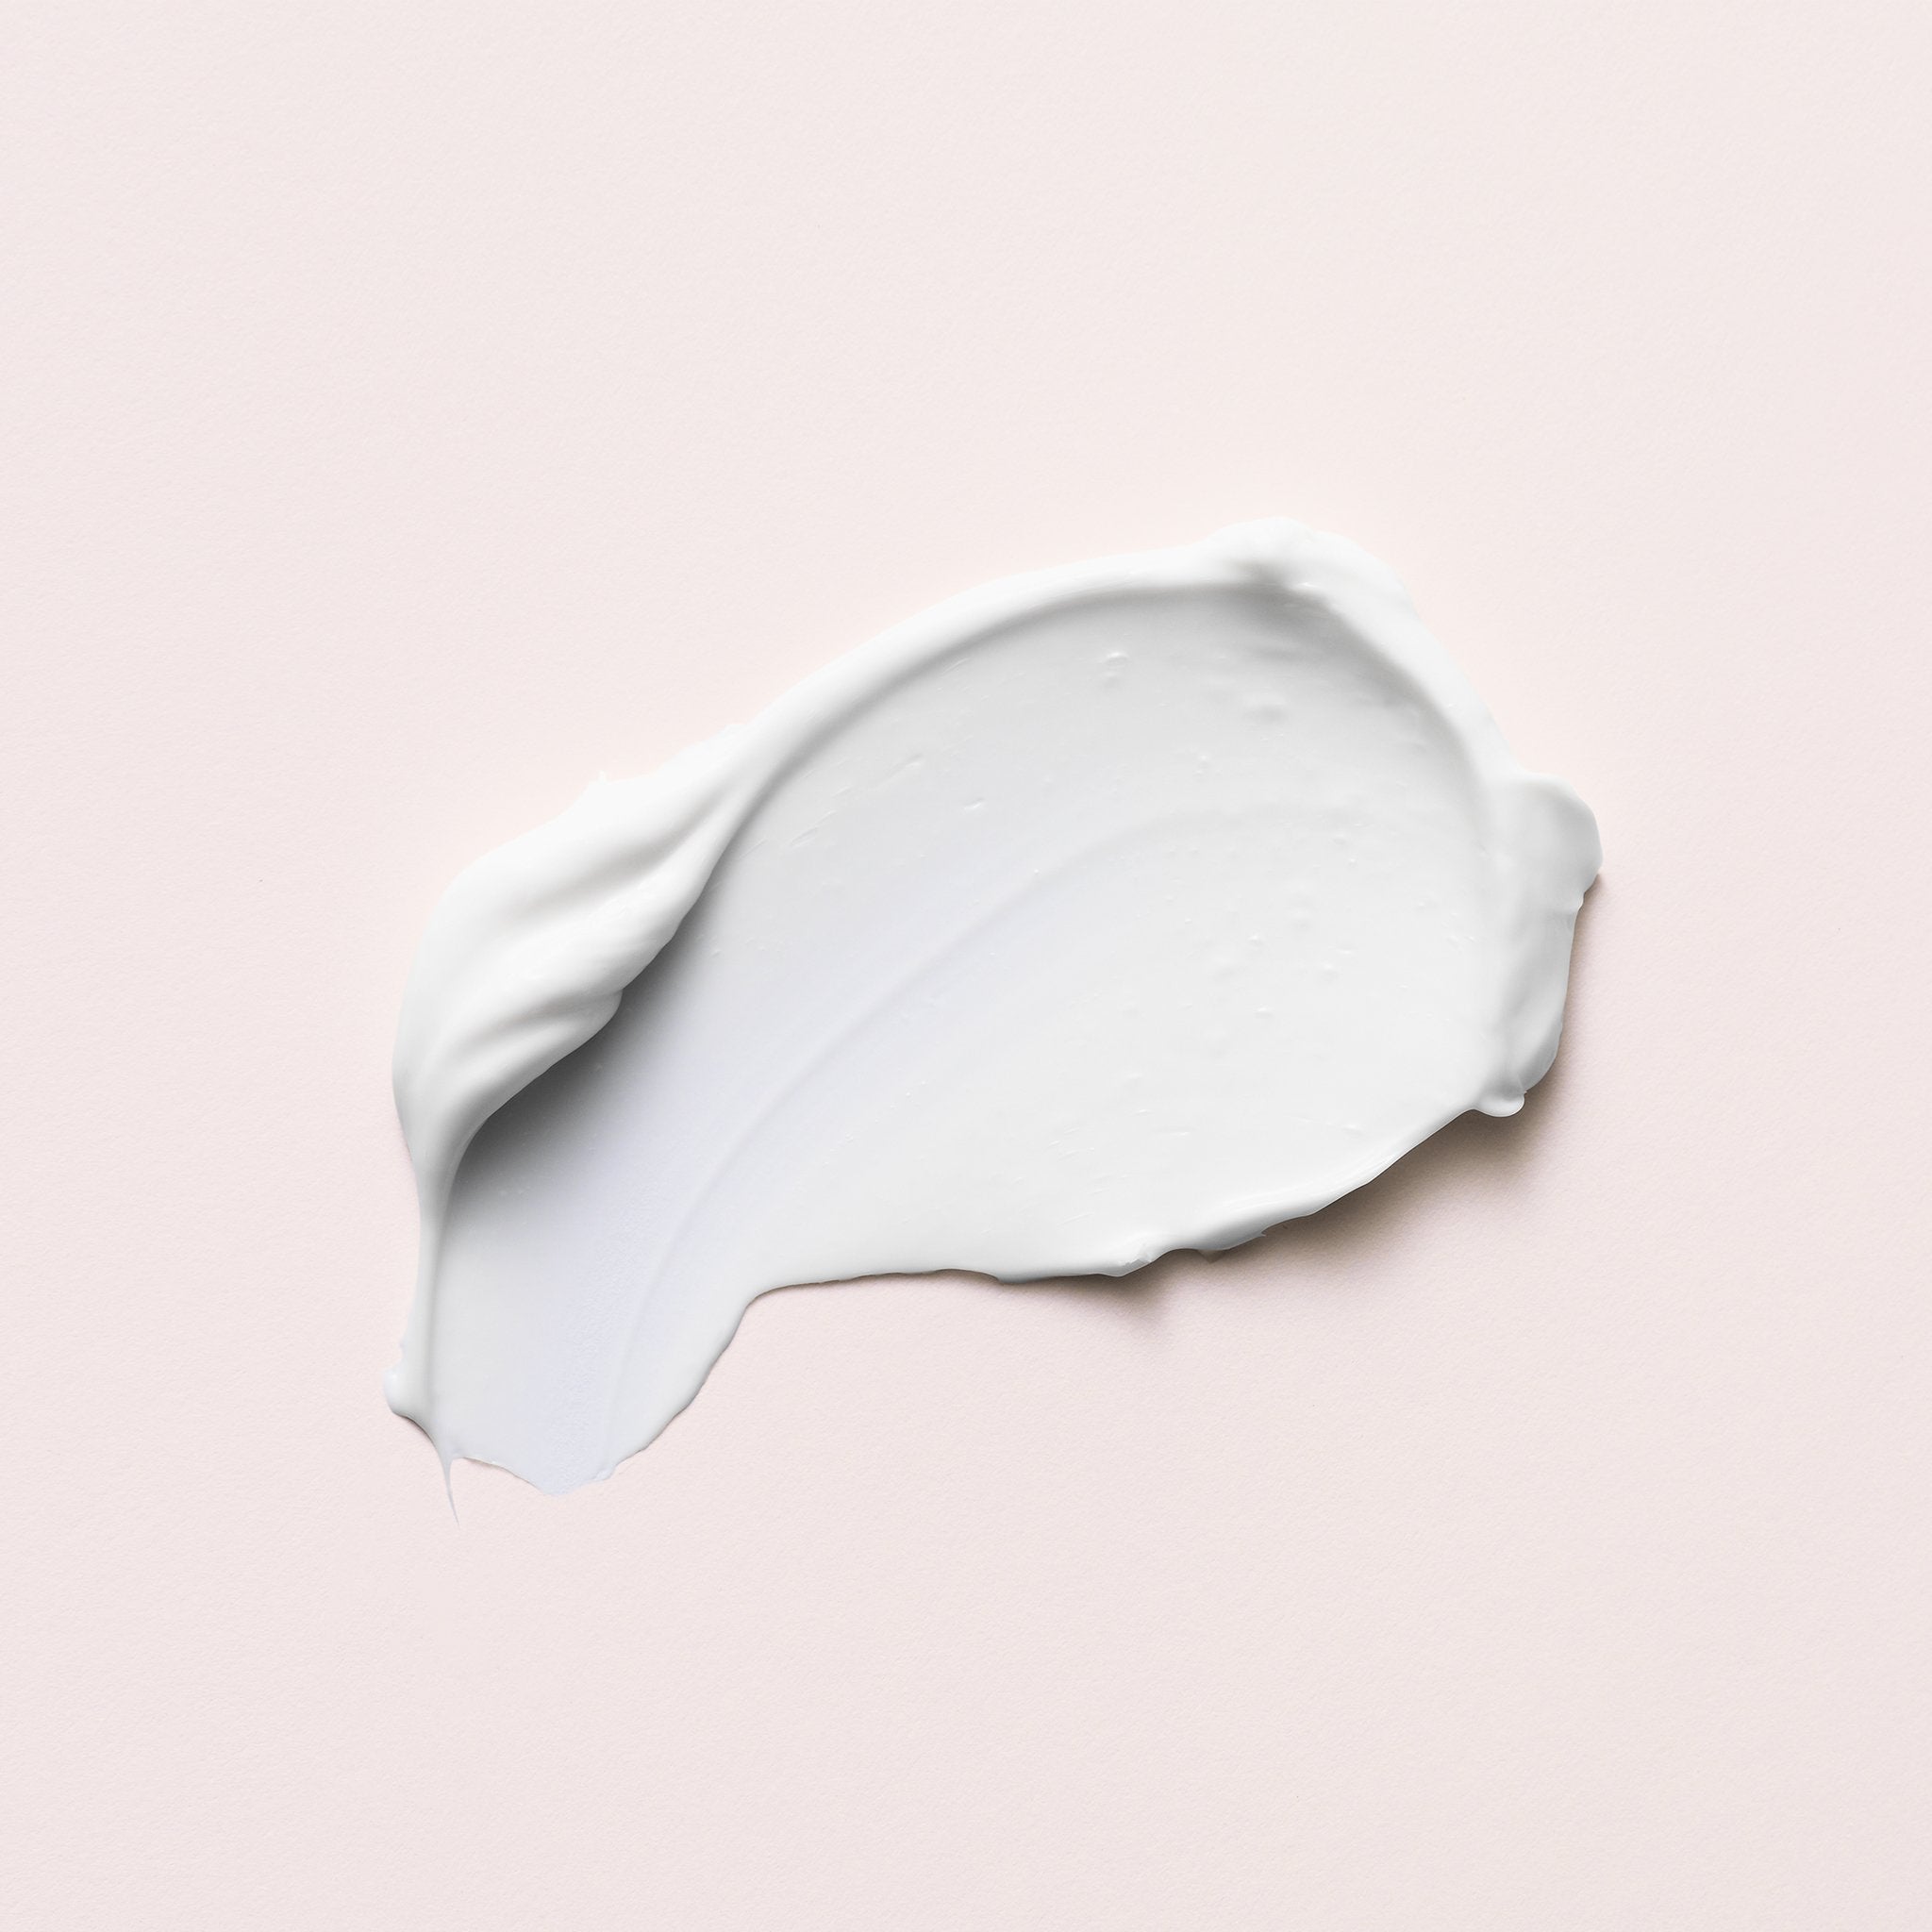 A smear of bright white cream on off-white background